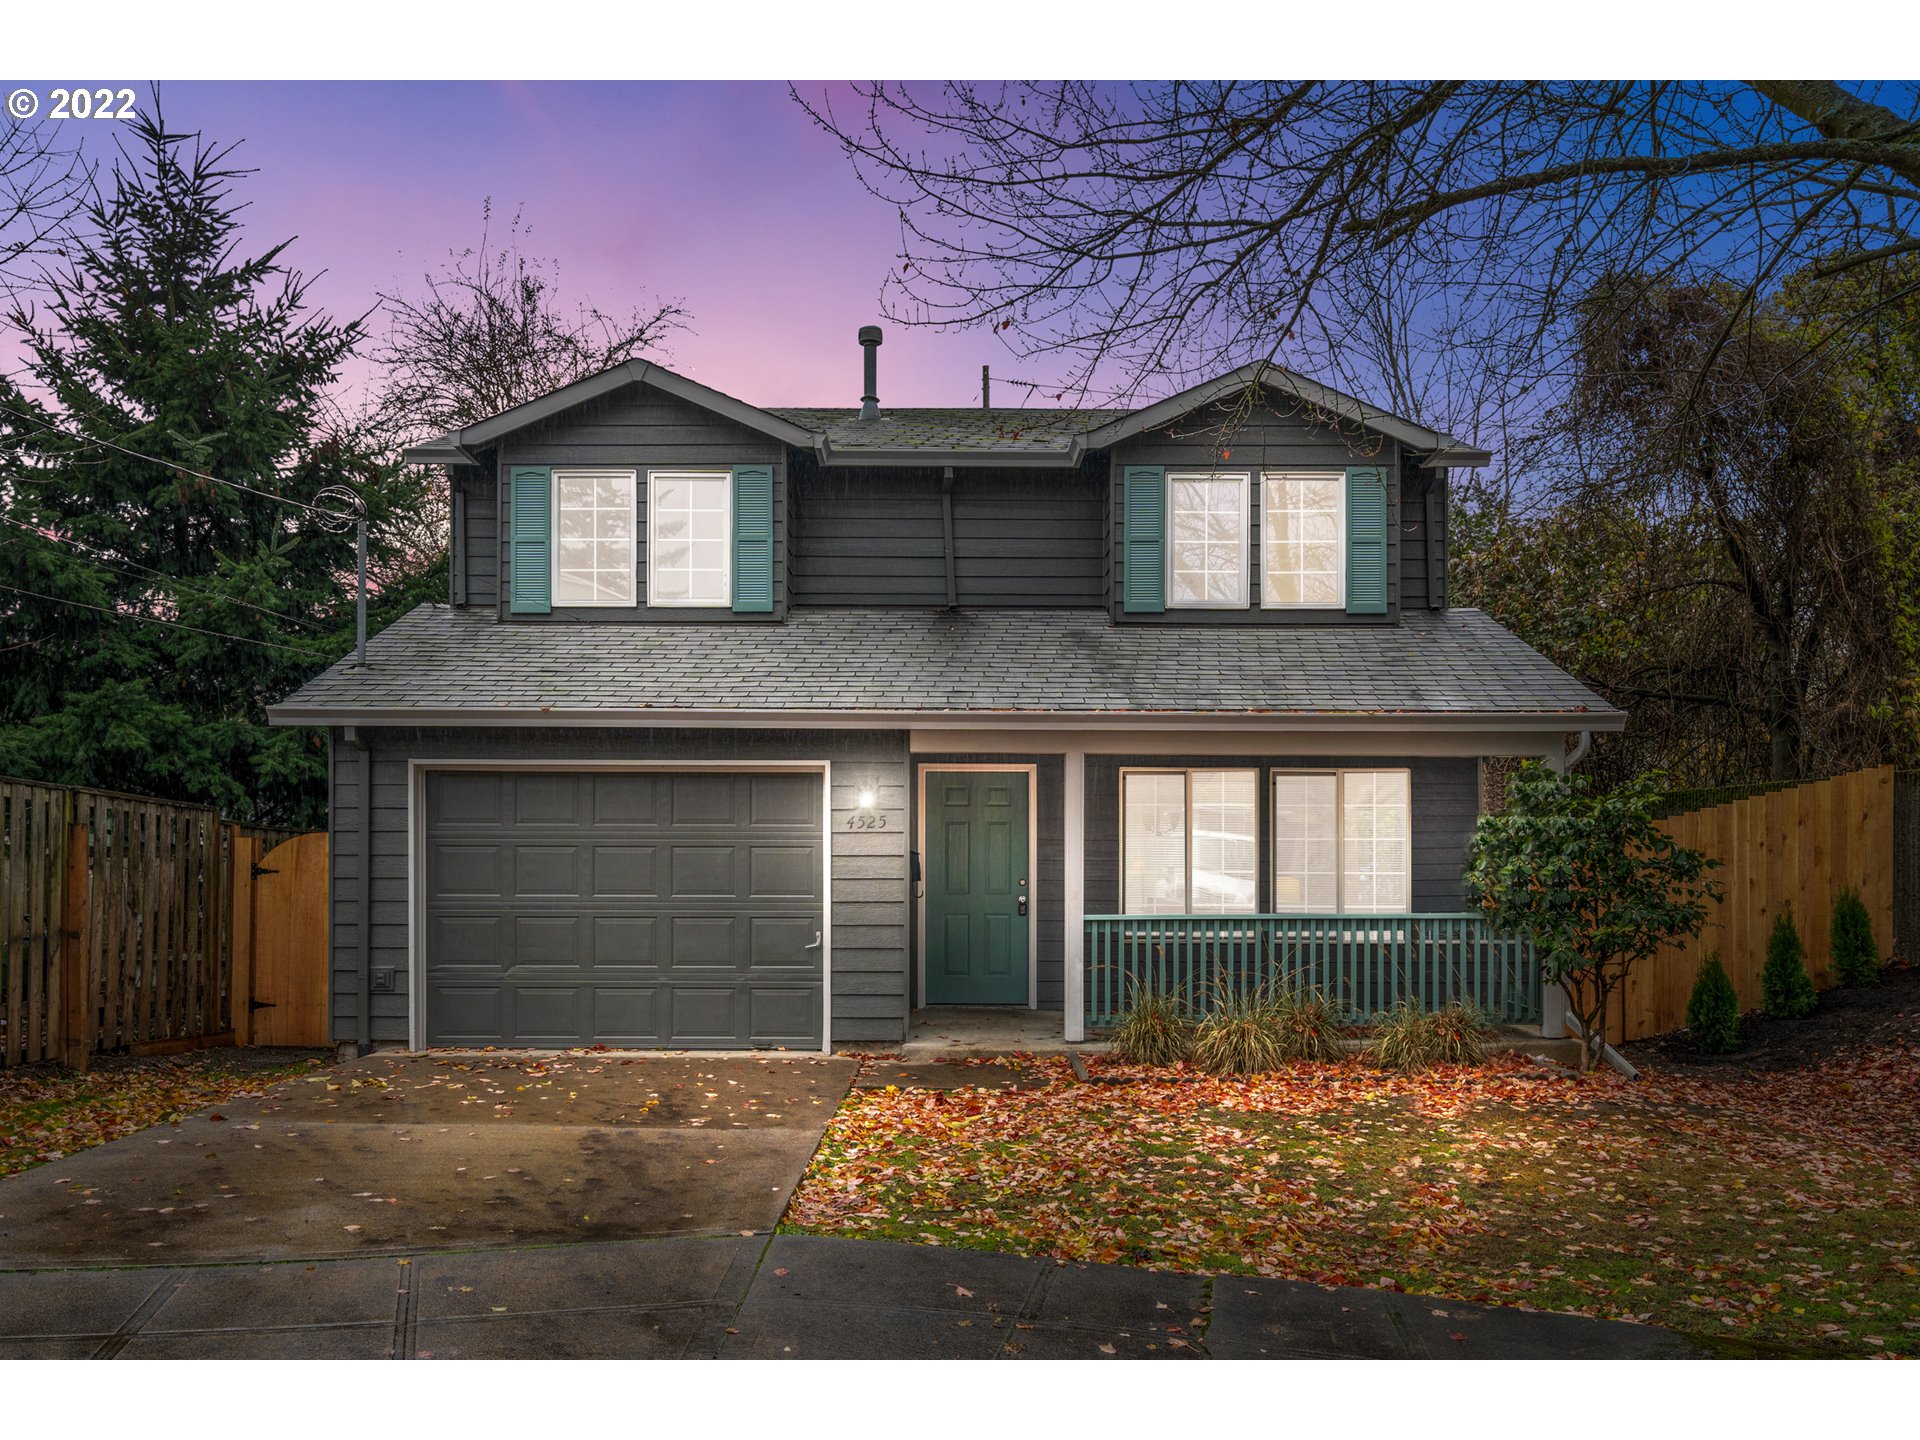 4525 N COLONIAL AVE, Portland, OR 97217